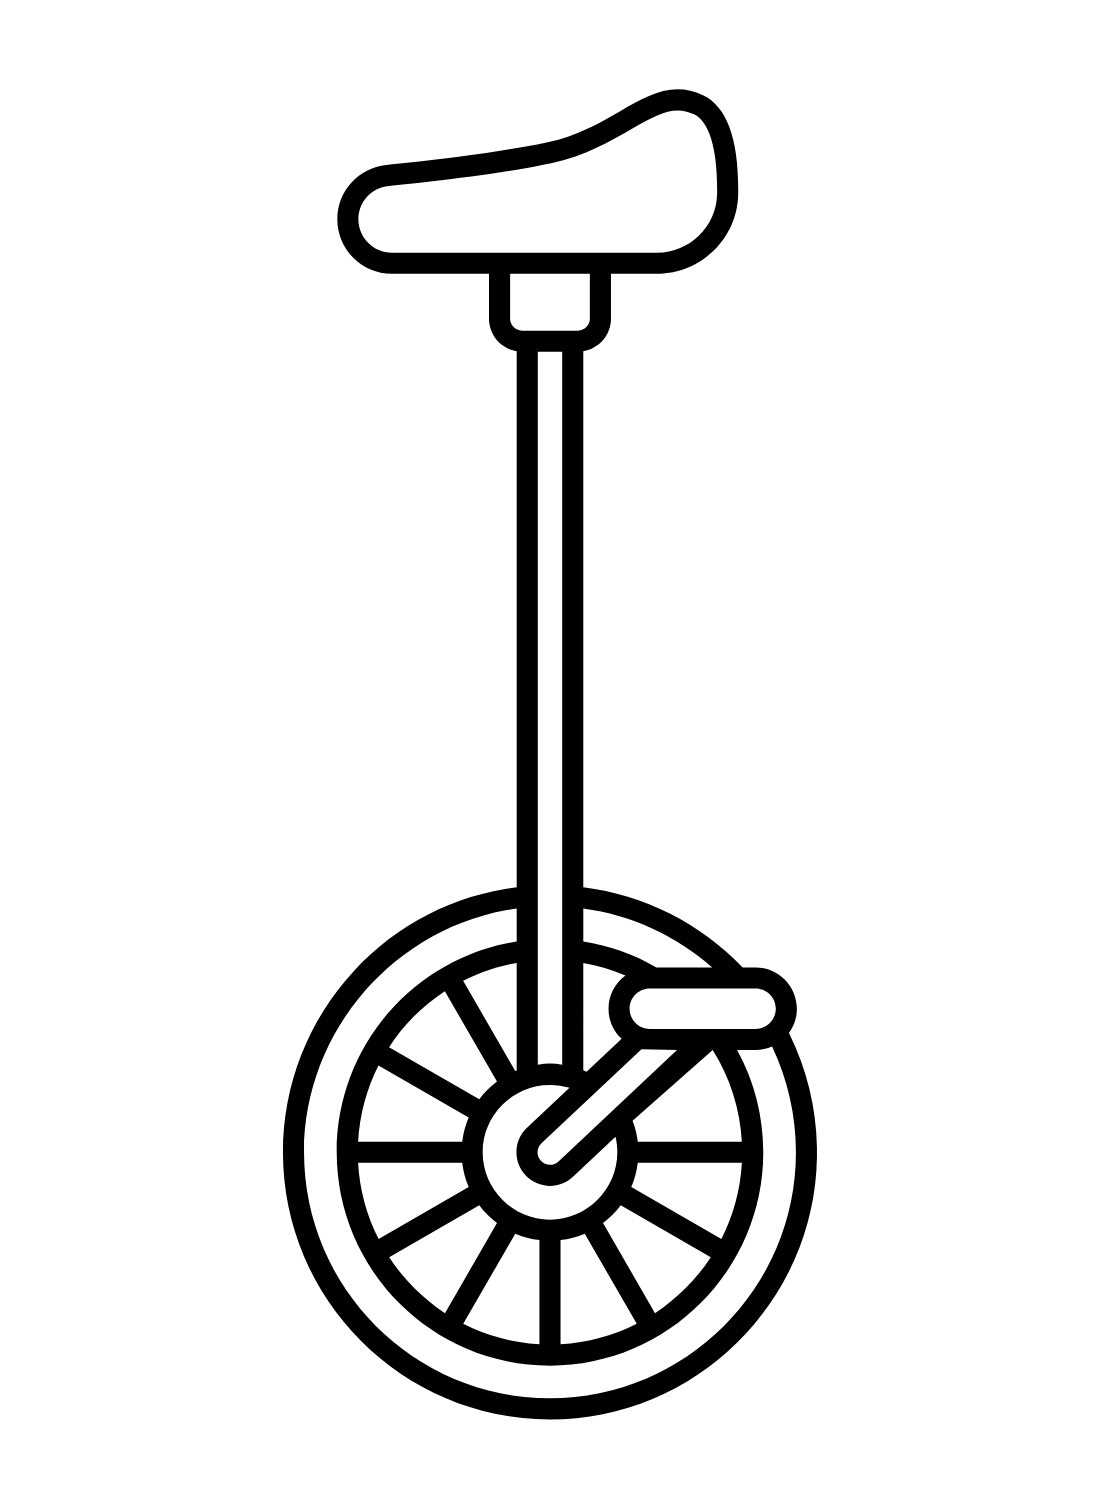 Unicycle Printable Coloring Page